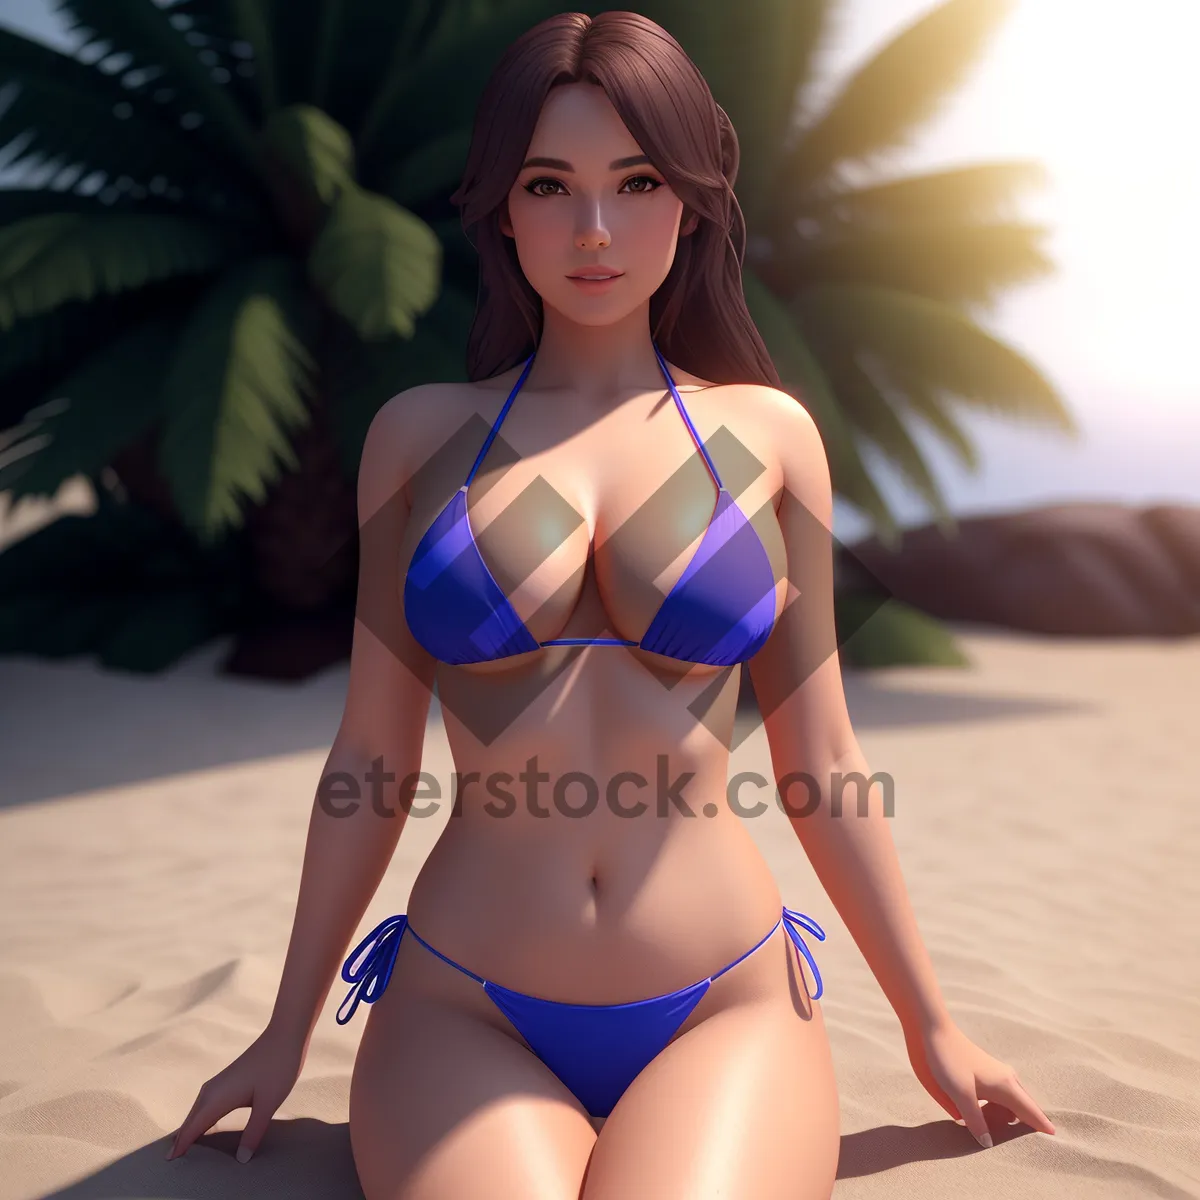 Picture of Stunning Beach Babe in Sexy Swimsuit